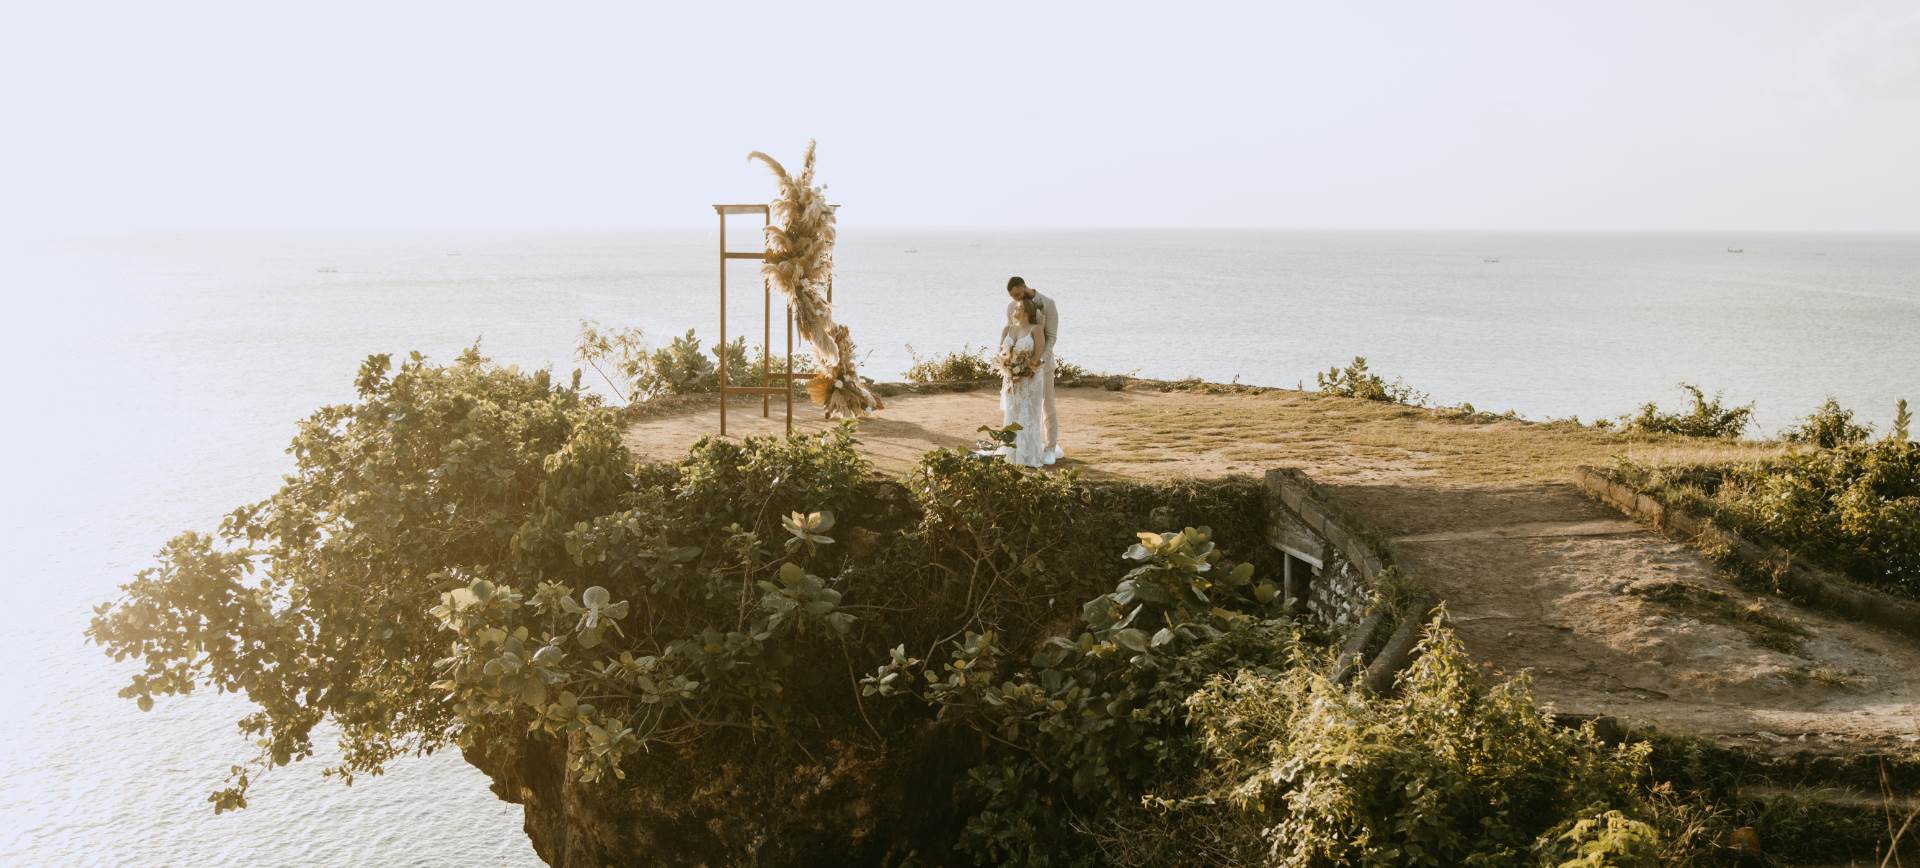 Elope to Bali All-inclusive Wedding Package with Cliffside Ceremony